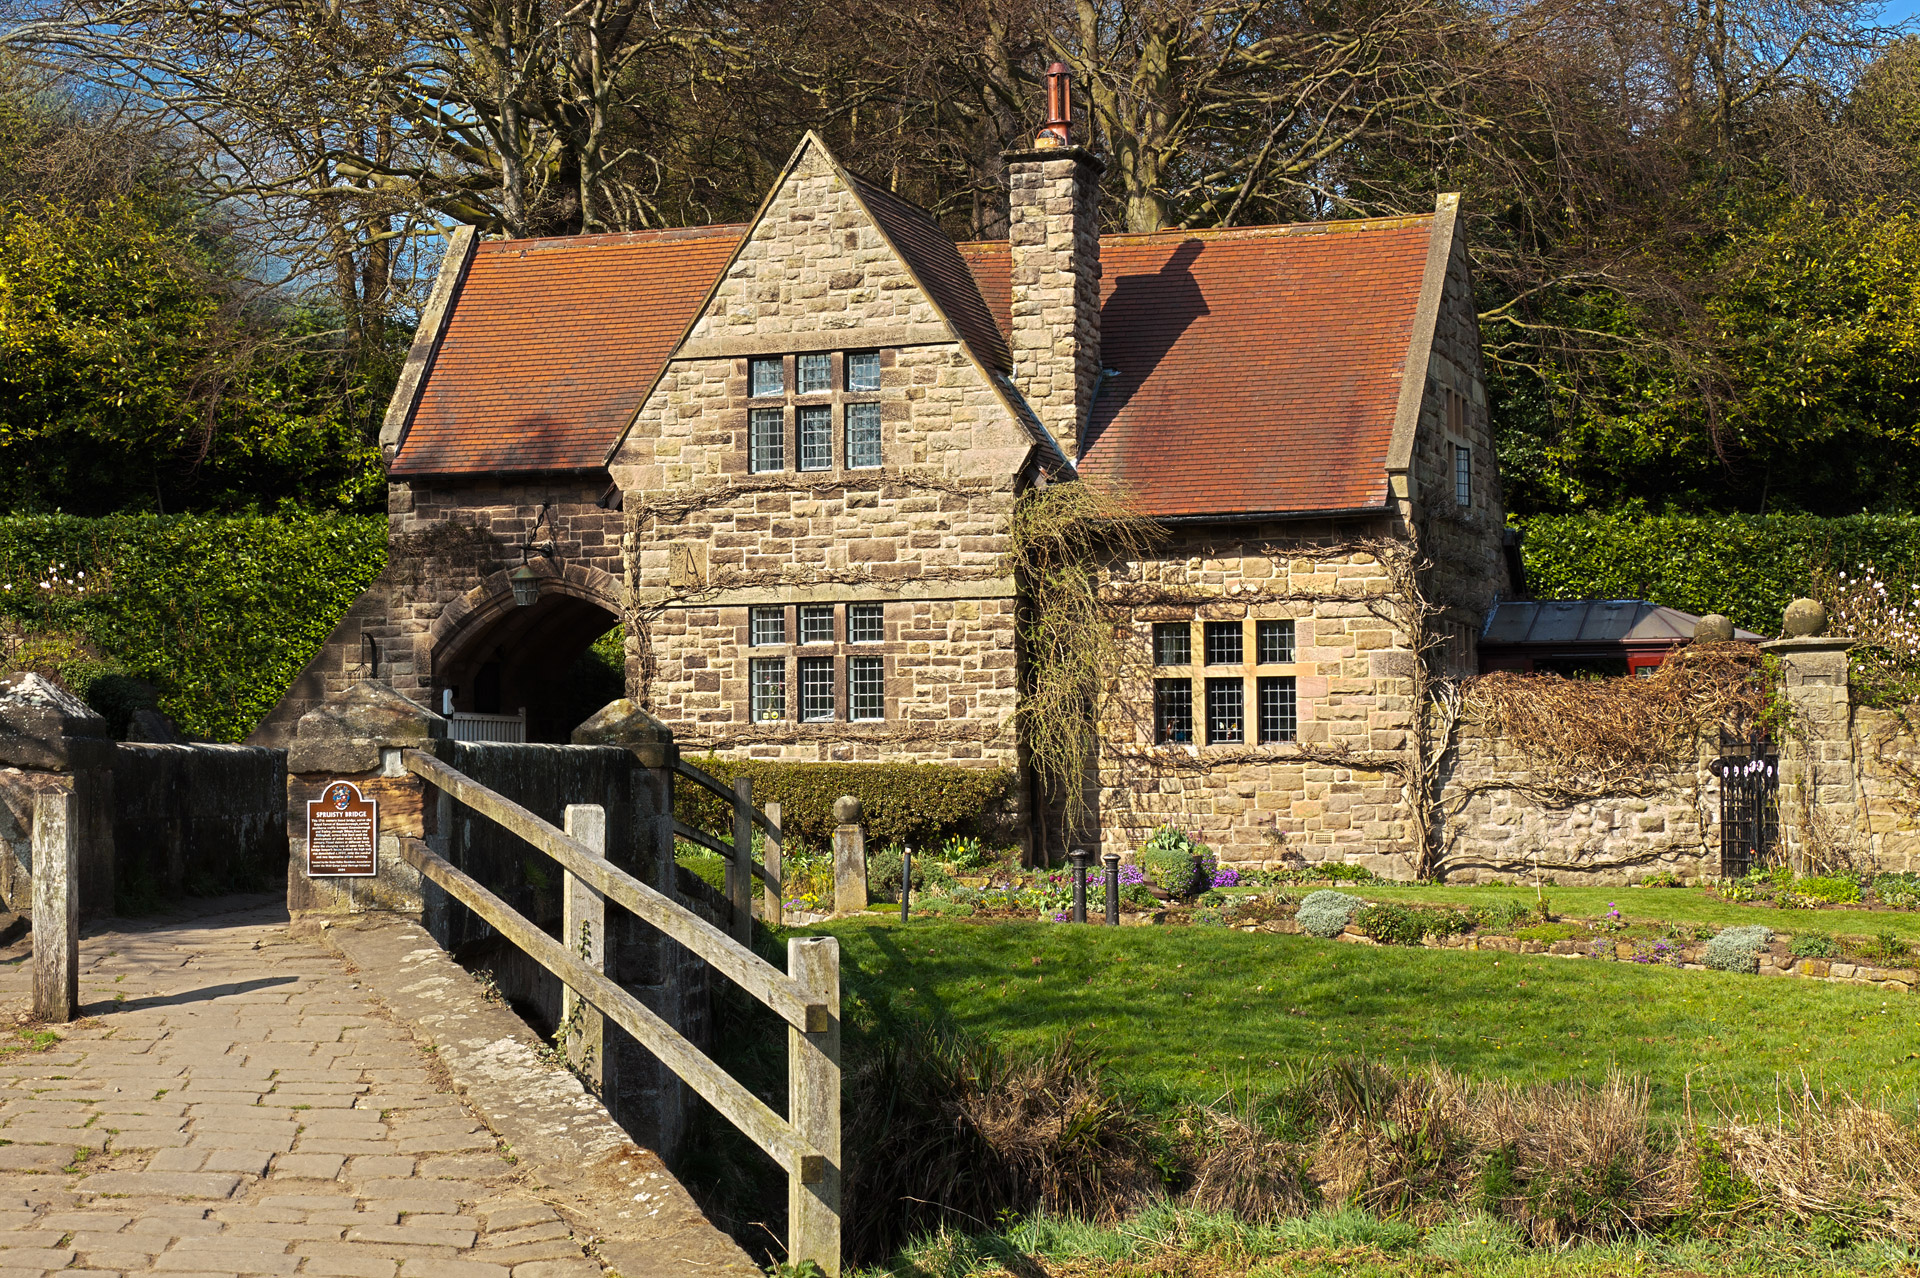 Old english house made from stone with a bridge in in the foreground